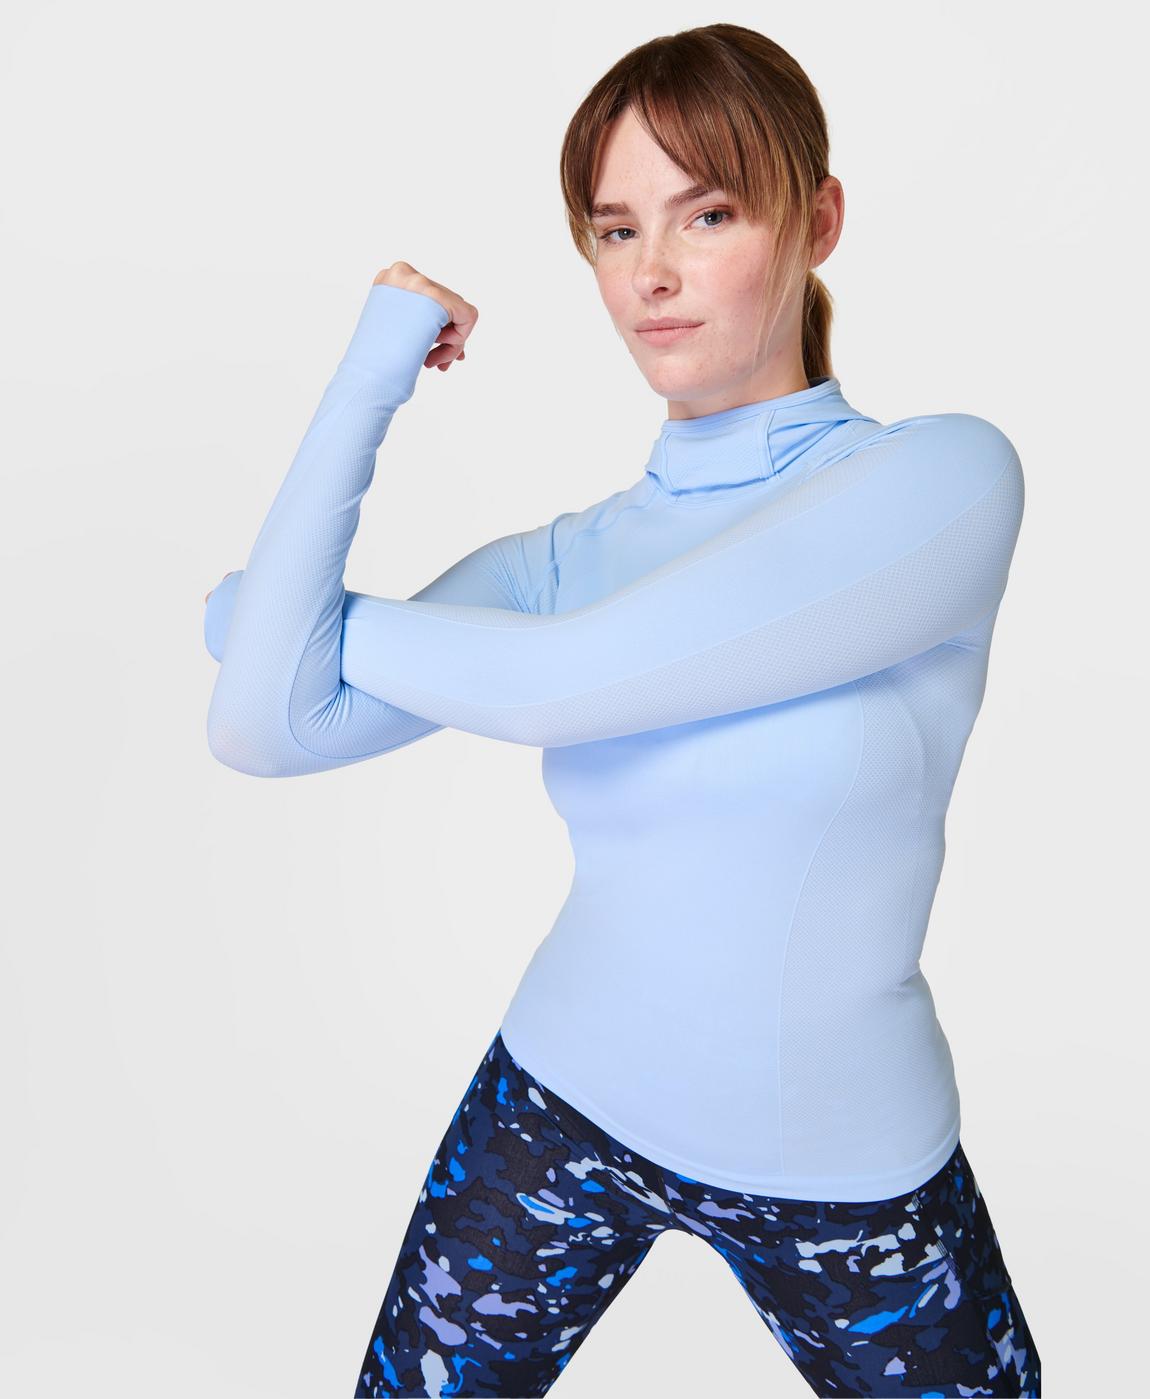 Athlete Hooded Long Sleeve Top - Breeze Blue | Women's Base Layers ...